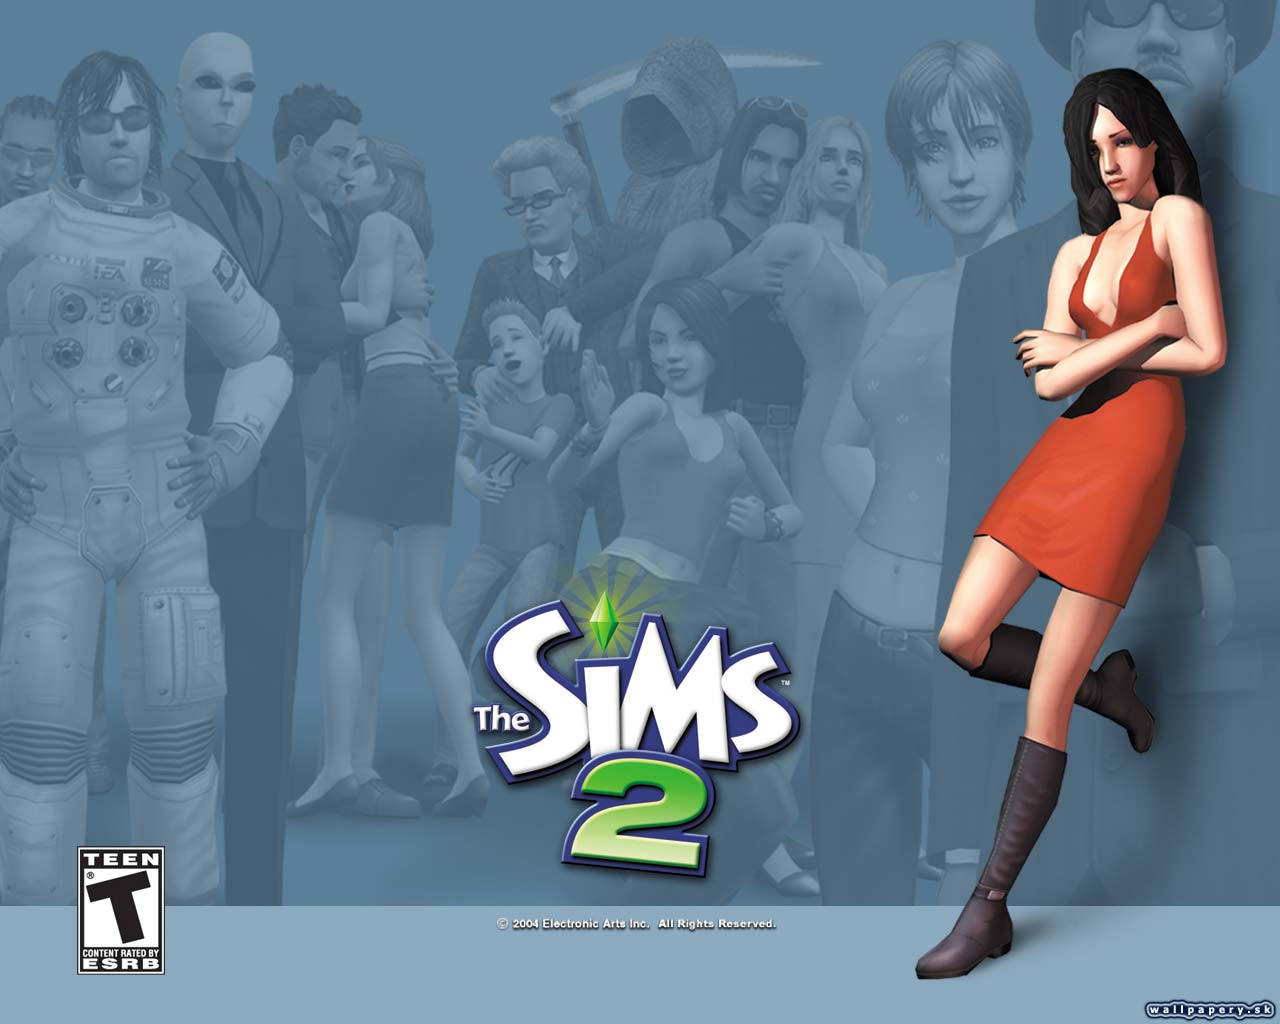 The Sims 2 - wallpaper 18